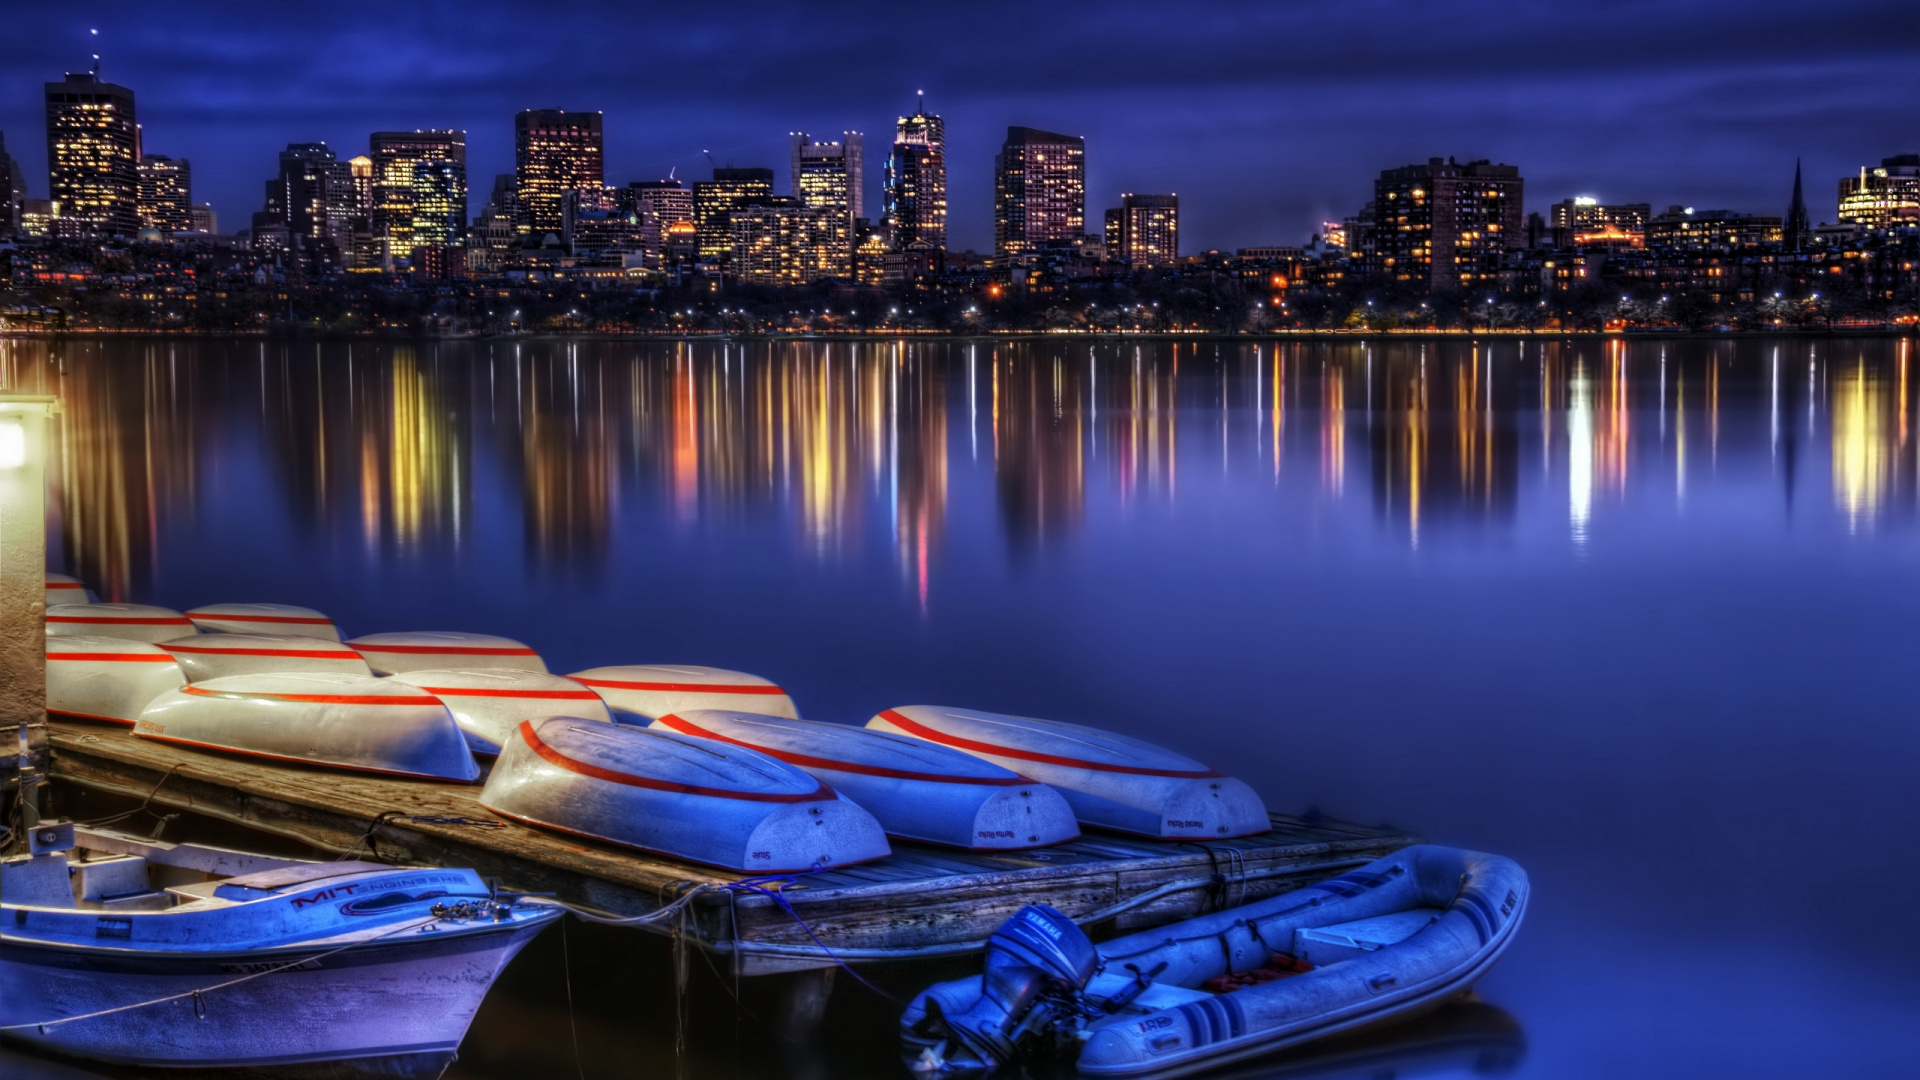 Blue and White Boat on Water During Night Time. Wallpaper in 1920x1080 Resolution